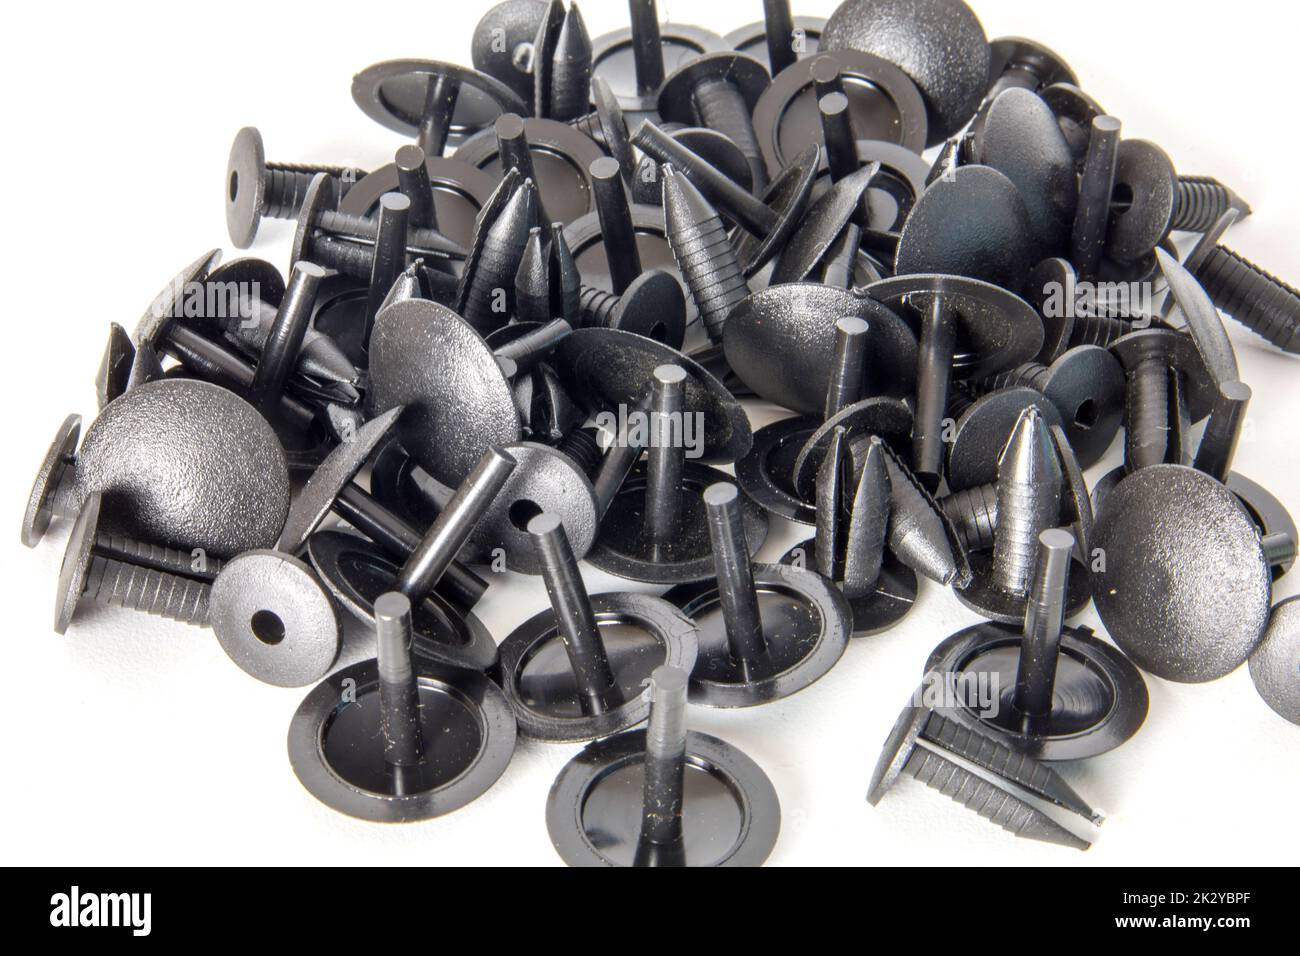 Black clips. Car spare parts isolated on white. Stock Photo